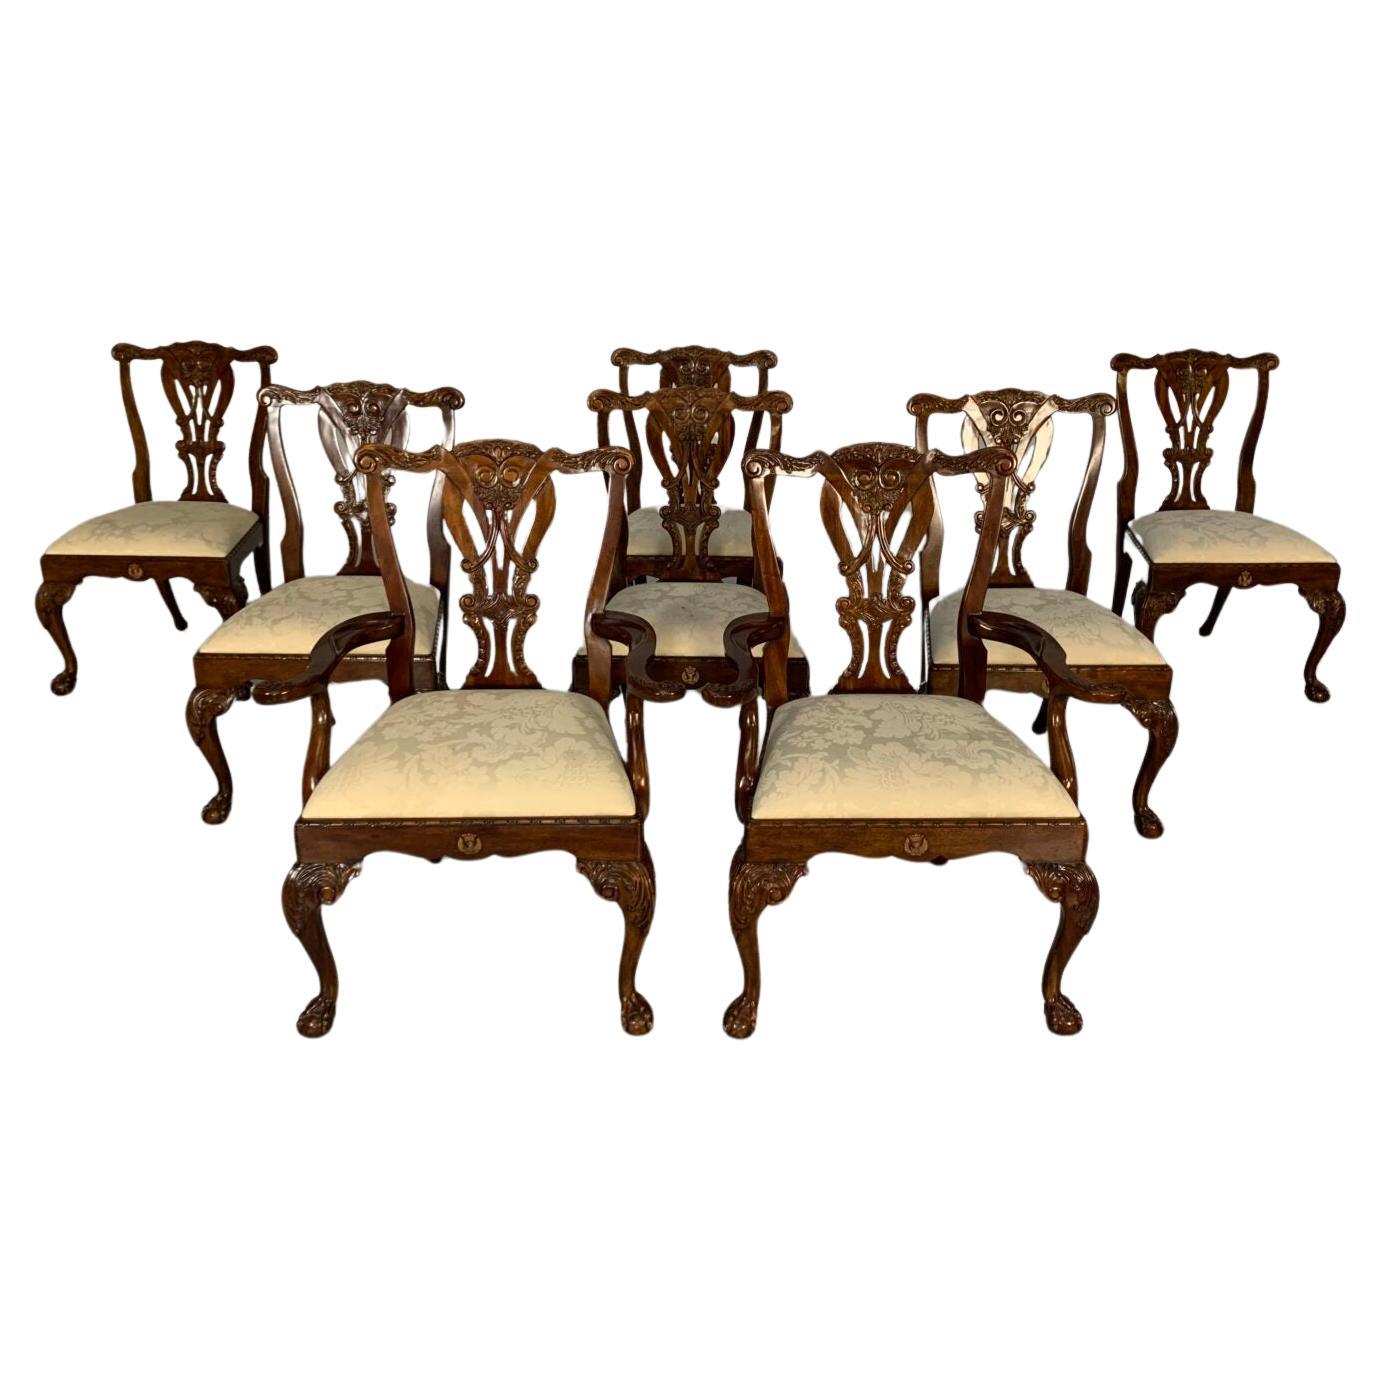 Suite of 8 Theodore Alexander "Rococo" Dining Chairs For Sale